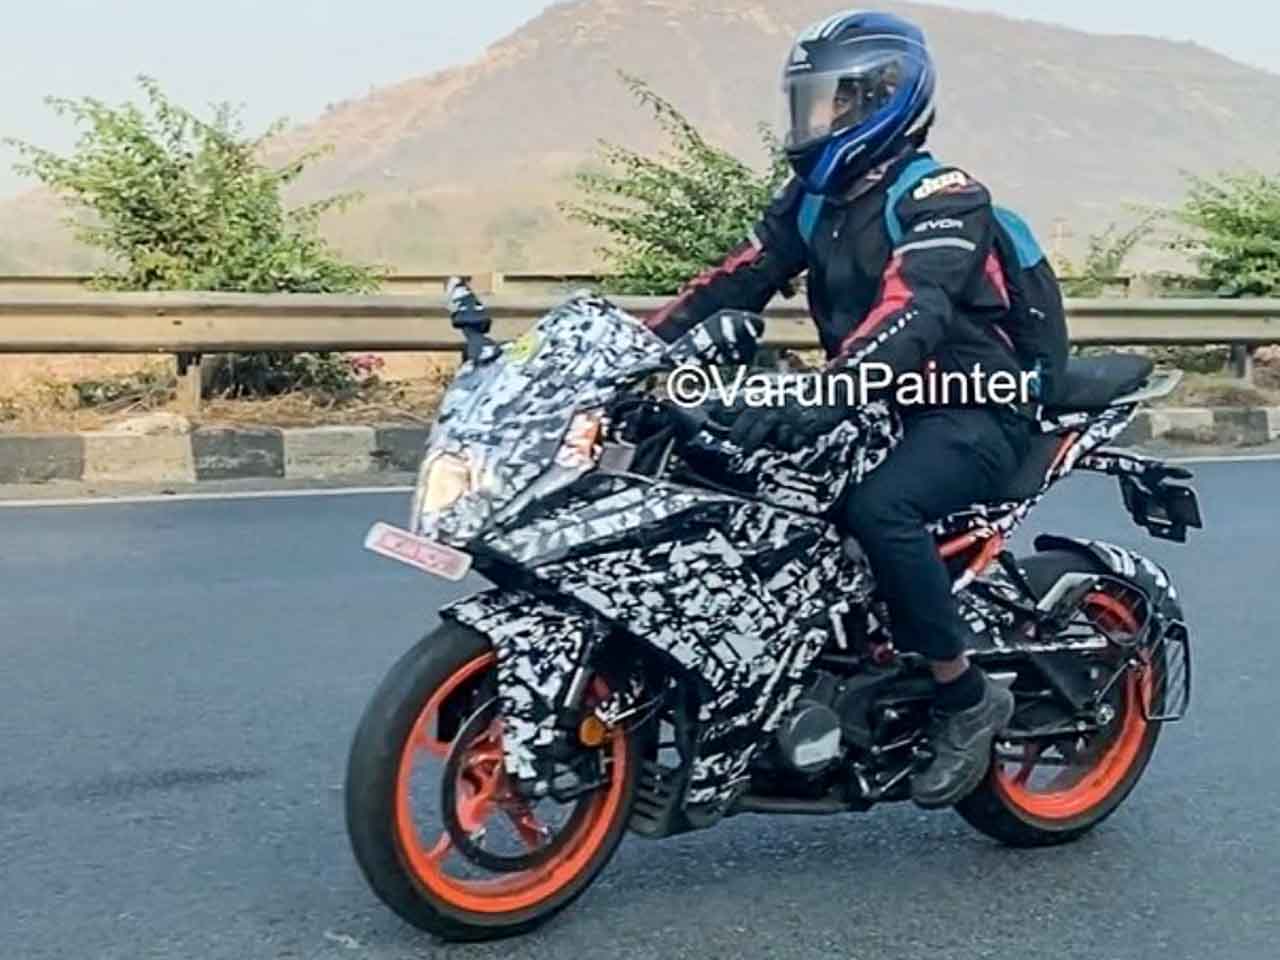 2021 Ktm Rc 125 / 200 New Gen Motorcycle Spied - Revised Front Look